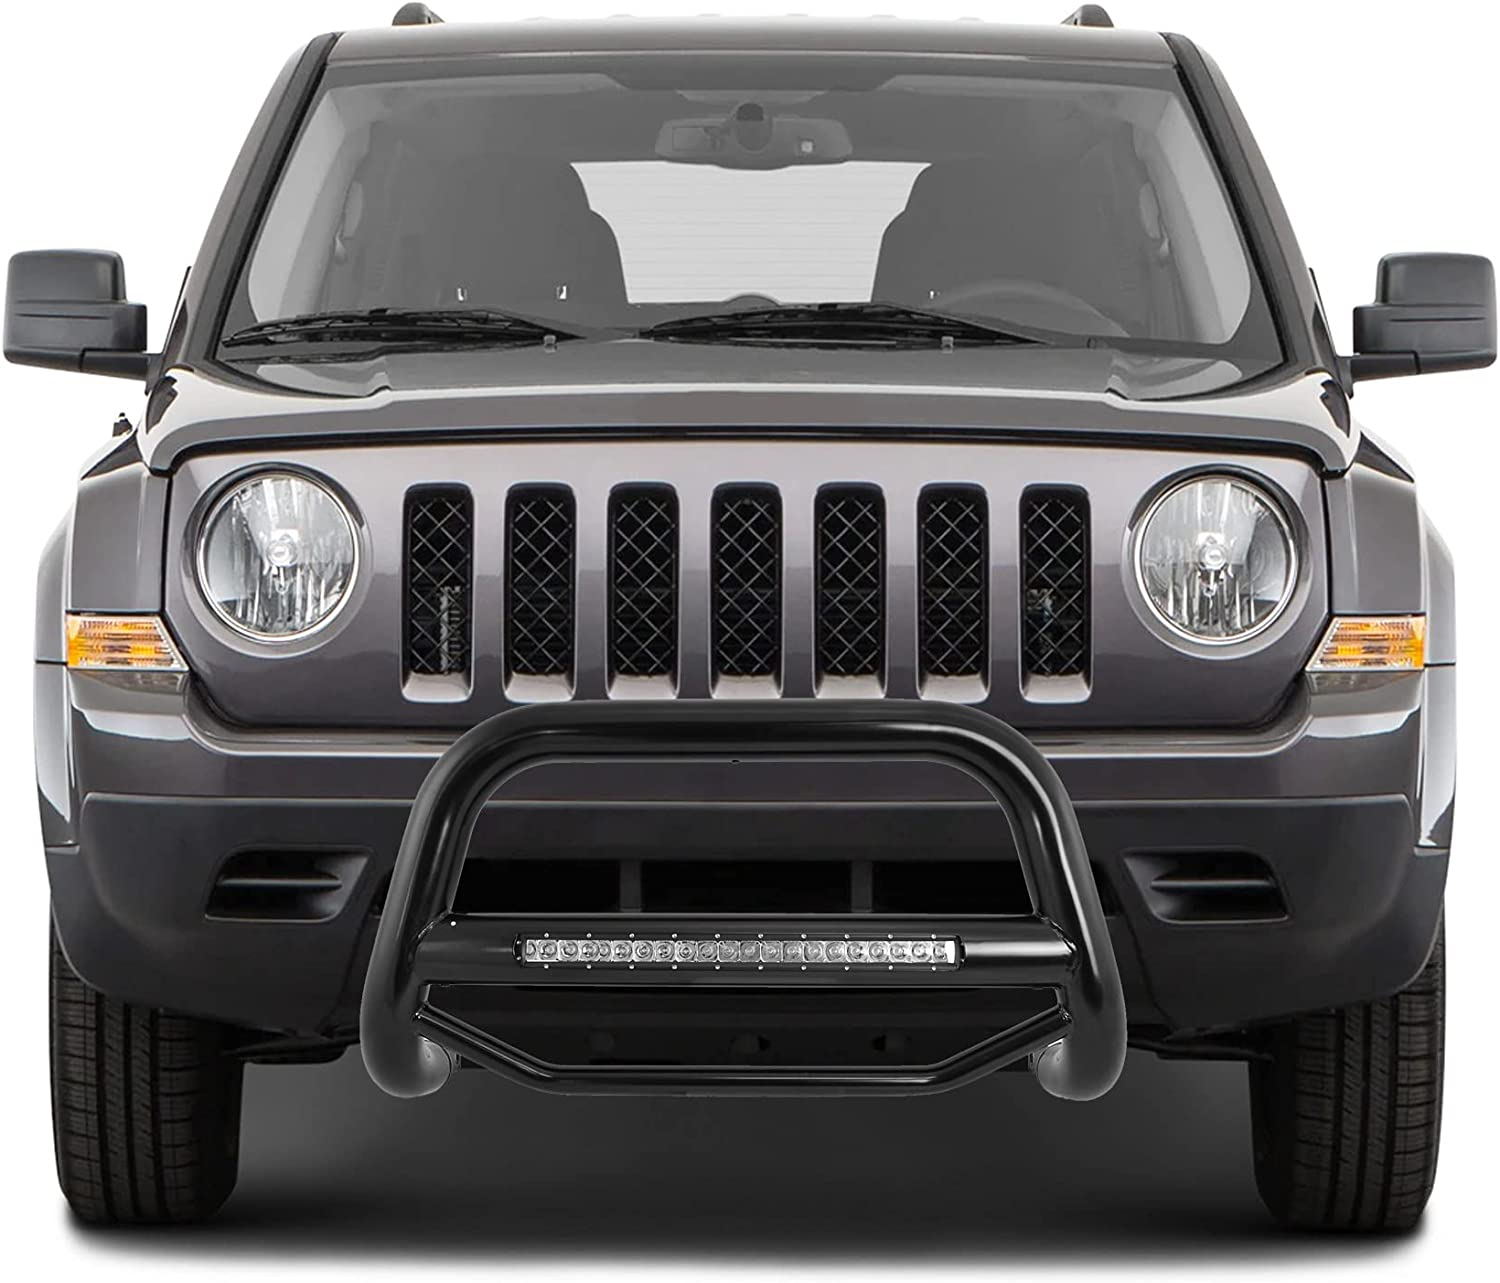 Brush Guard for 2014 jeep patriot